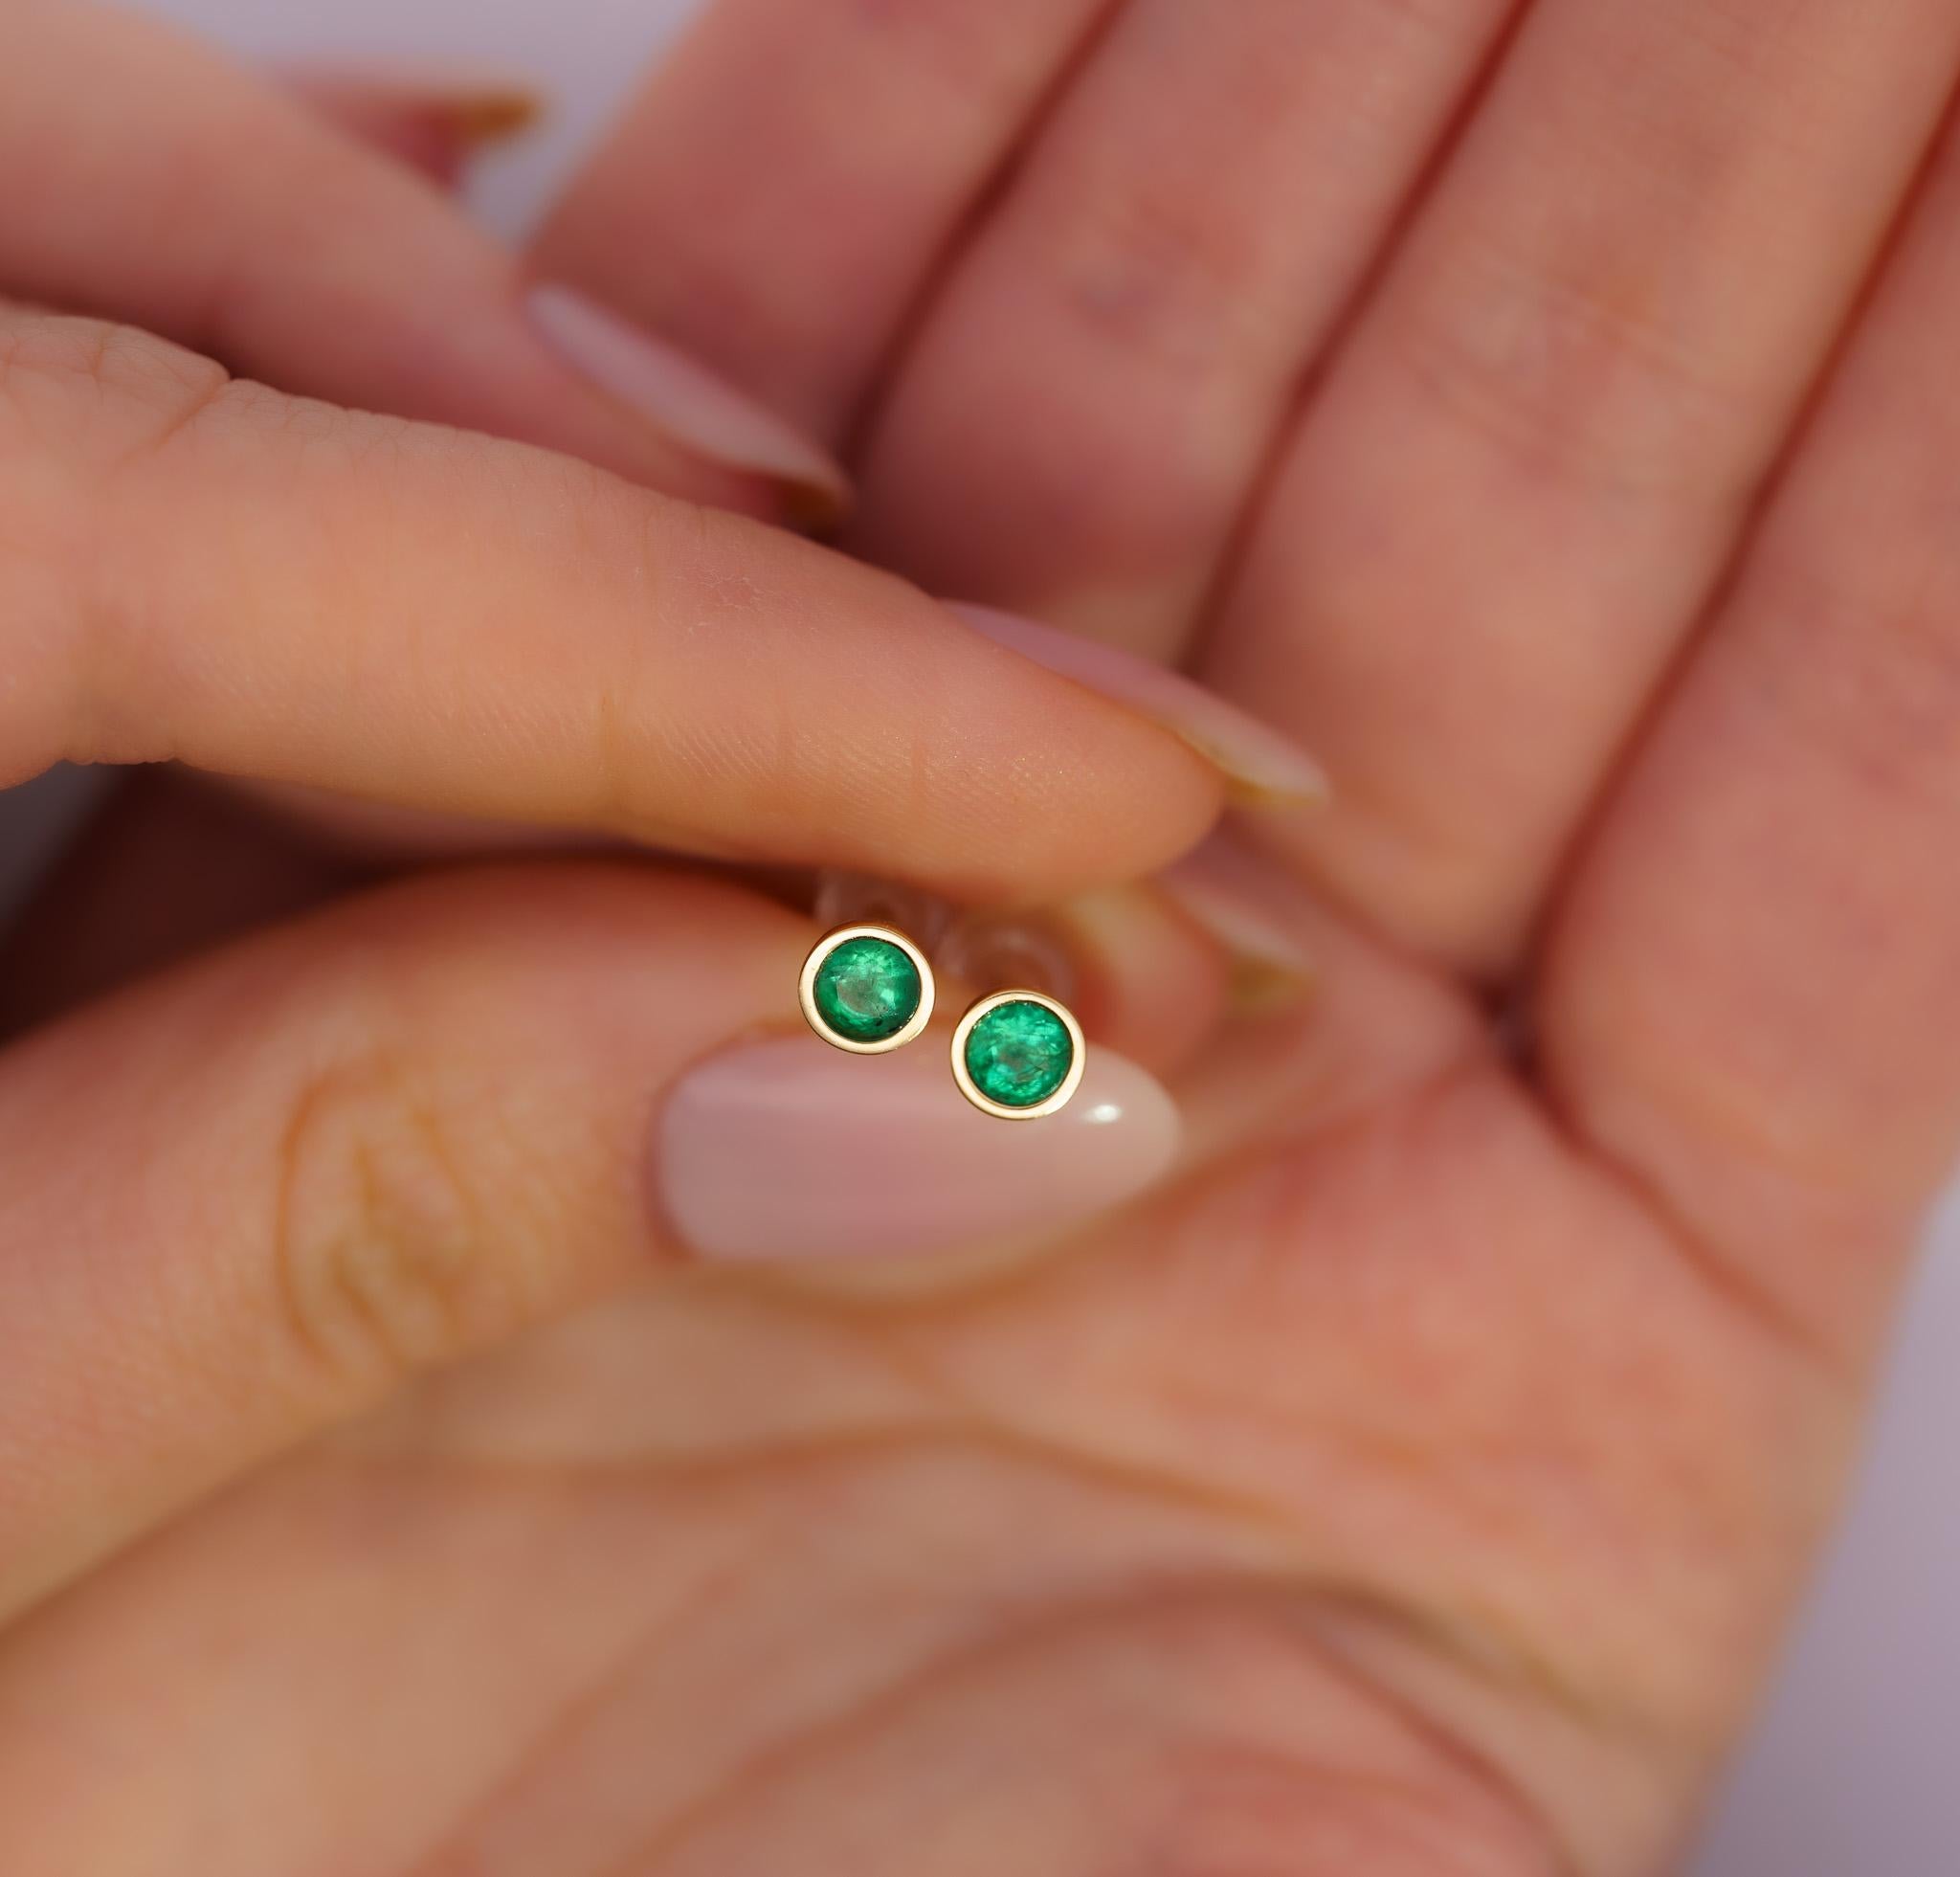 Natural 1/2 Carat Emerald Stud Earrings in 14K Yellow Gold. 

These modest emerald earrings boast two round-cut emeralds with a total carat weight of 0.50; the emeralds are safely secured with a bezel setting. The 5 MM (each) studs are crafted from